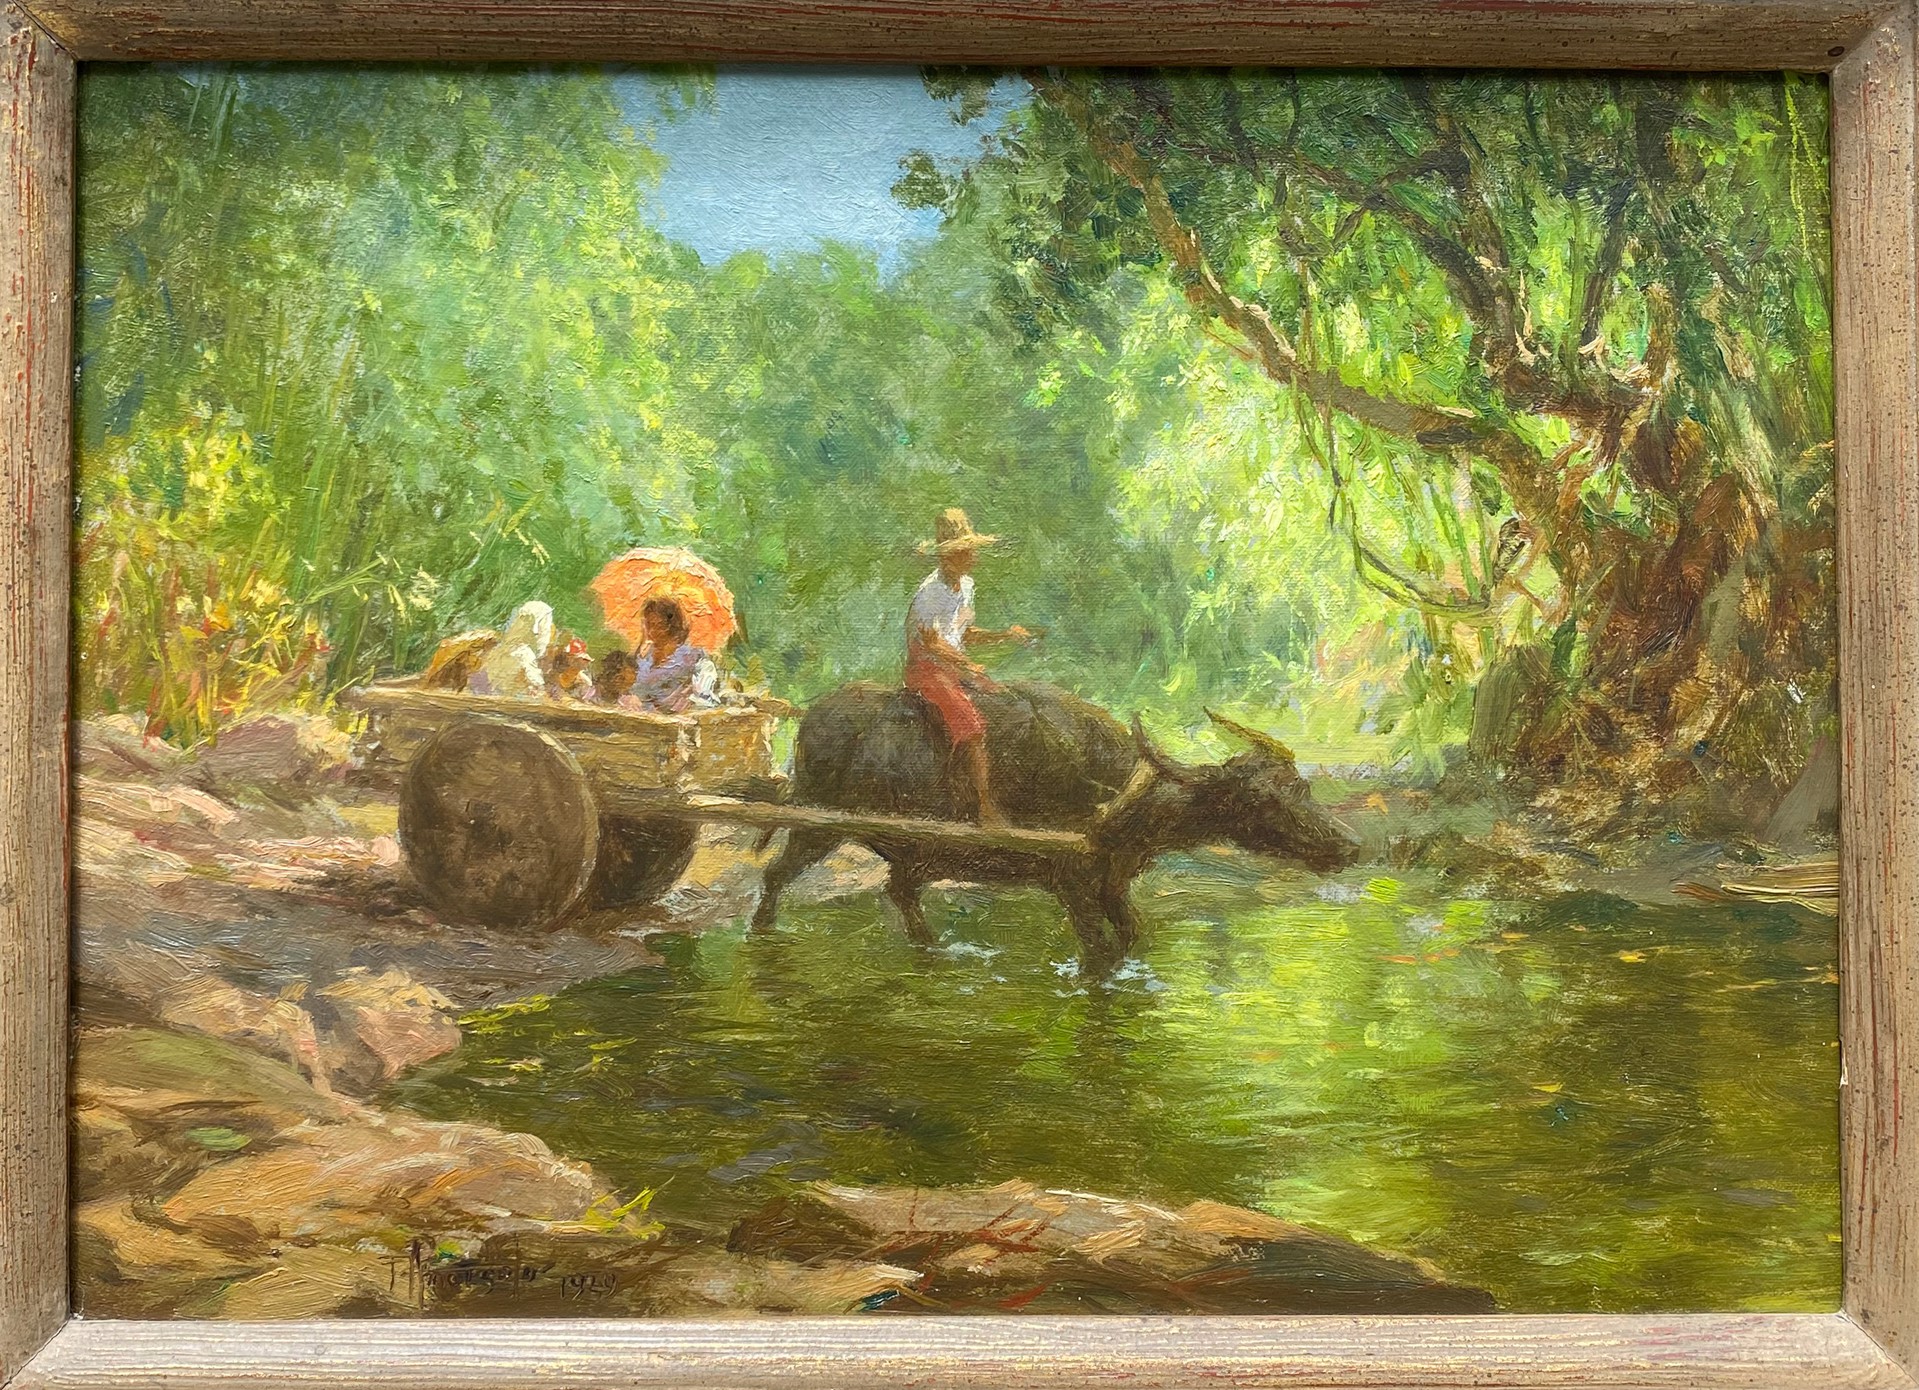 Carabao with Cart and Passengers by Fernando Amorsolo